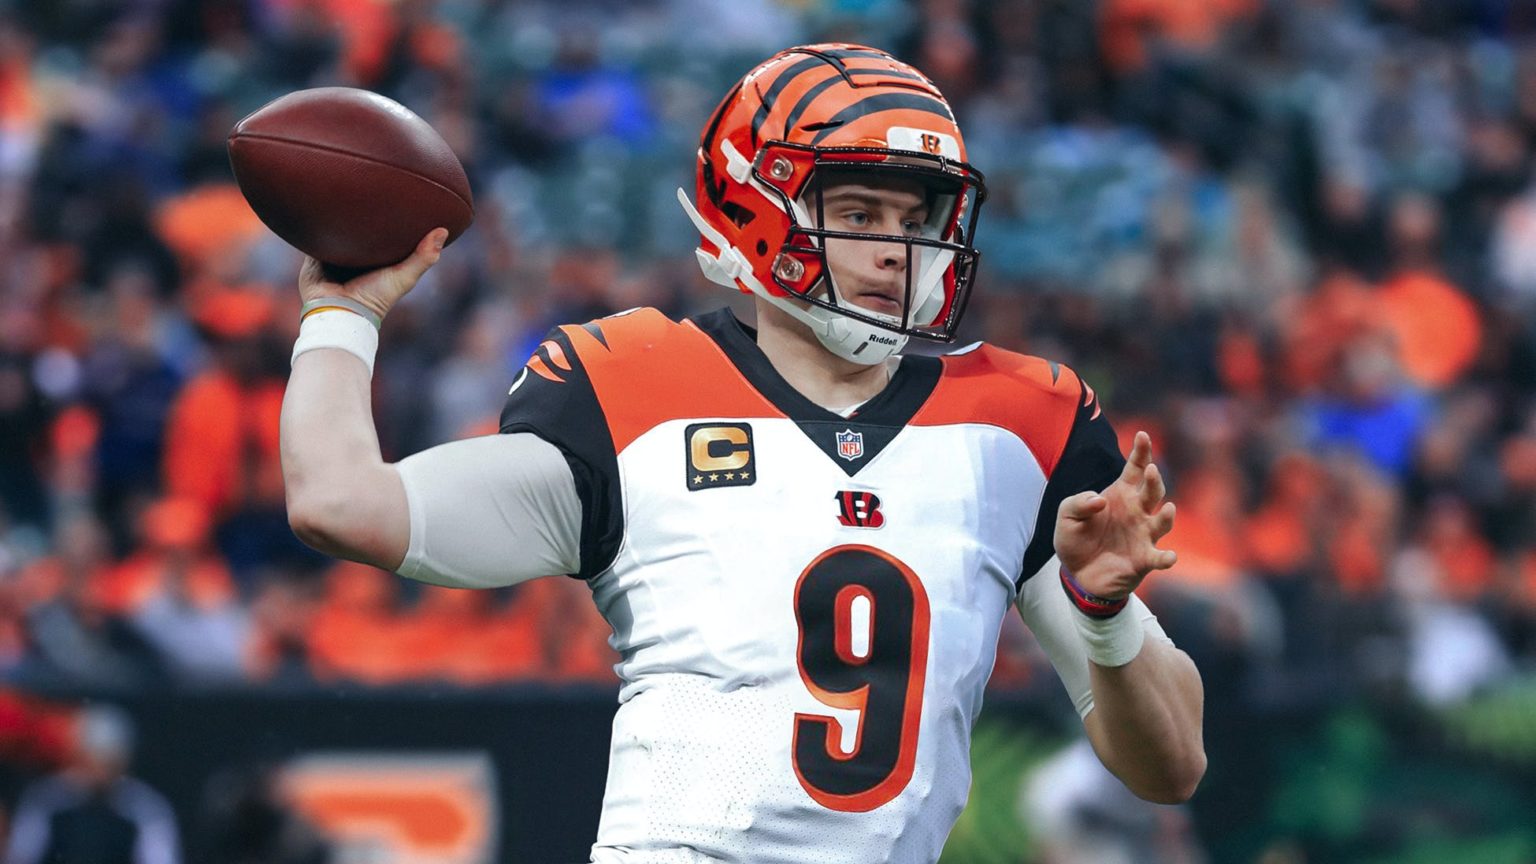 Ravens vs Bengals NFL Playoffs Preview, Tickets, Betting Odds and Schedule